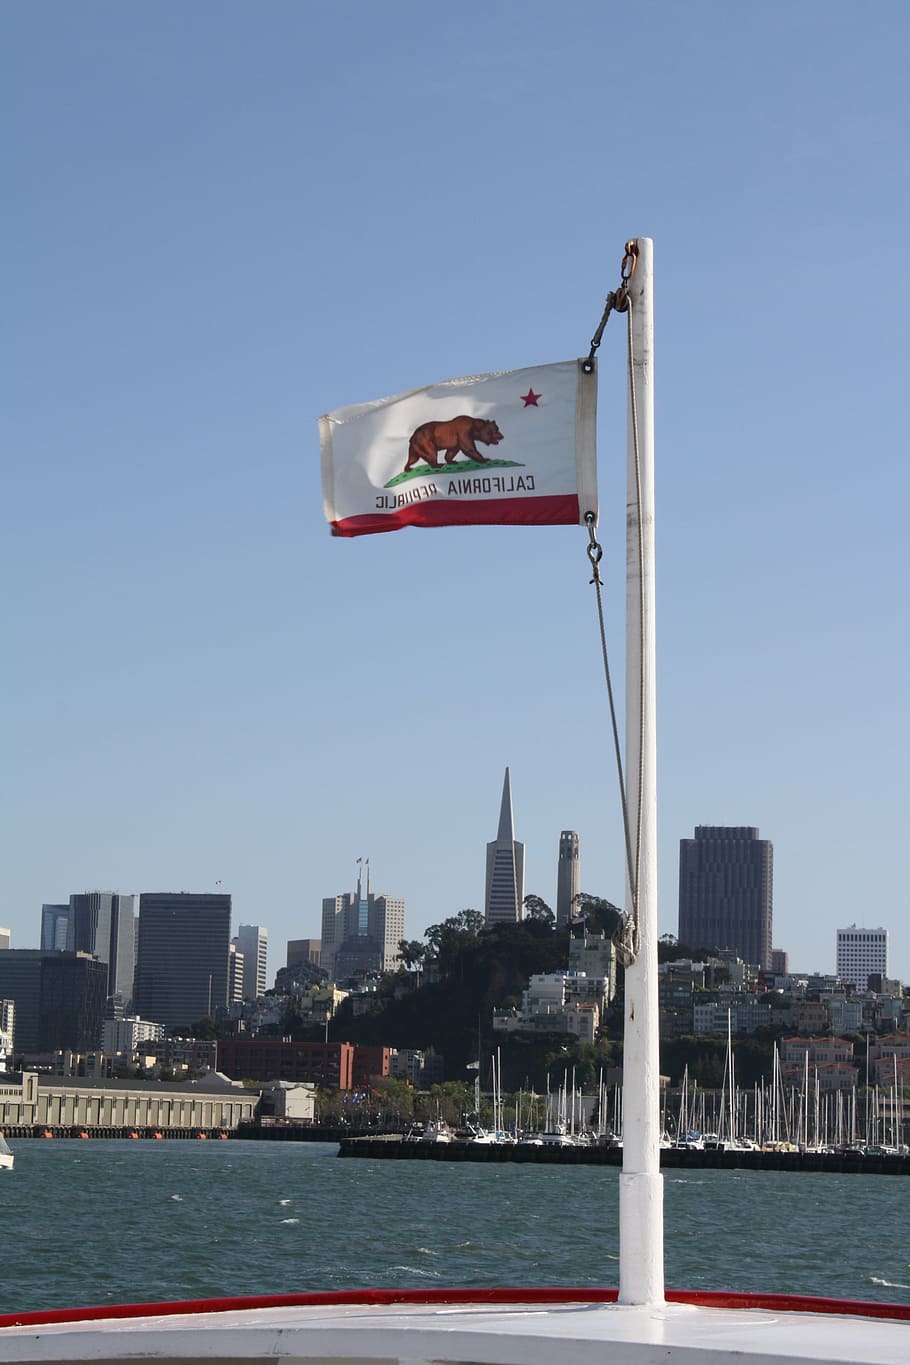 california, flag, boat, skyline, san francisco, architecture, water, sky, built structure, nature